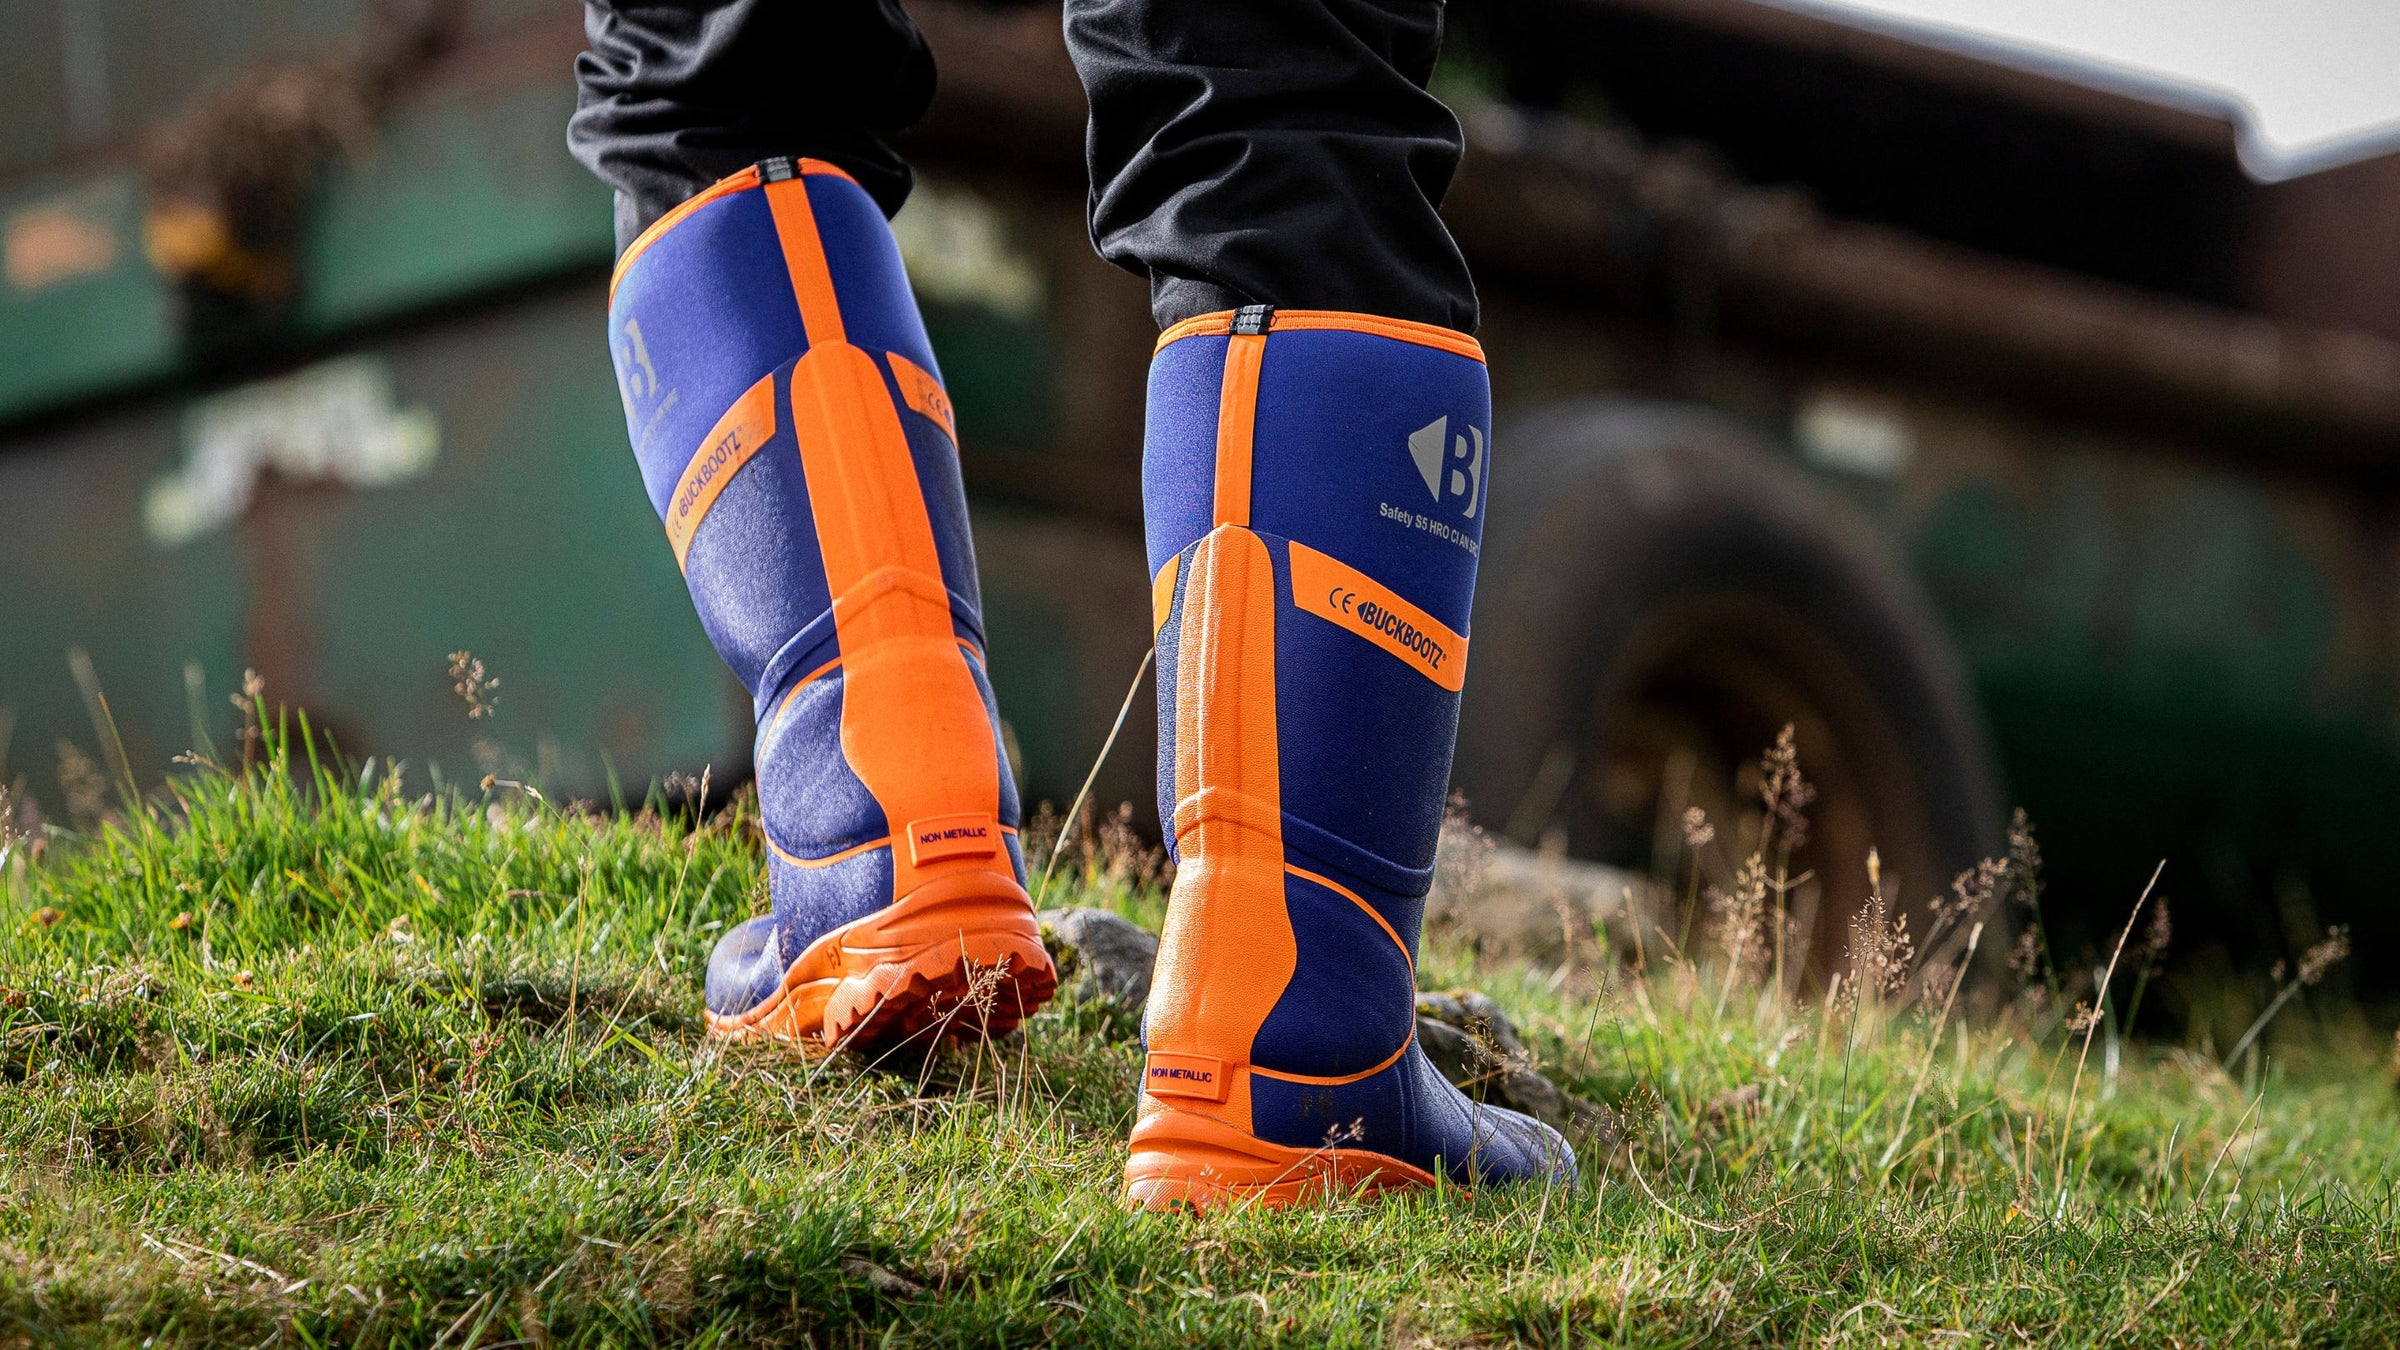 An image of the Buckler BBZ8000 Wellies in action